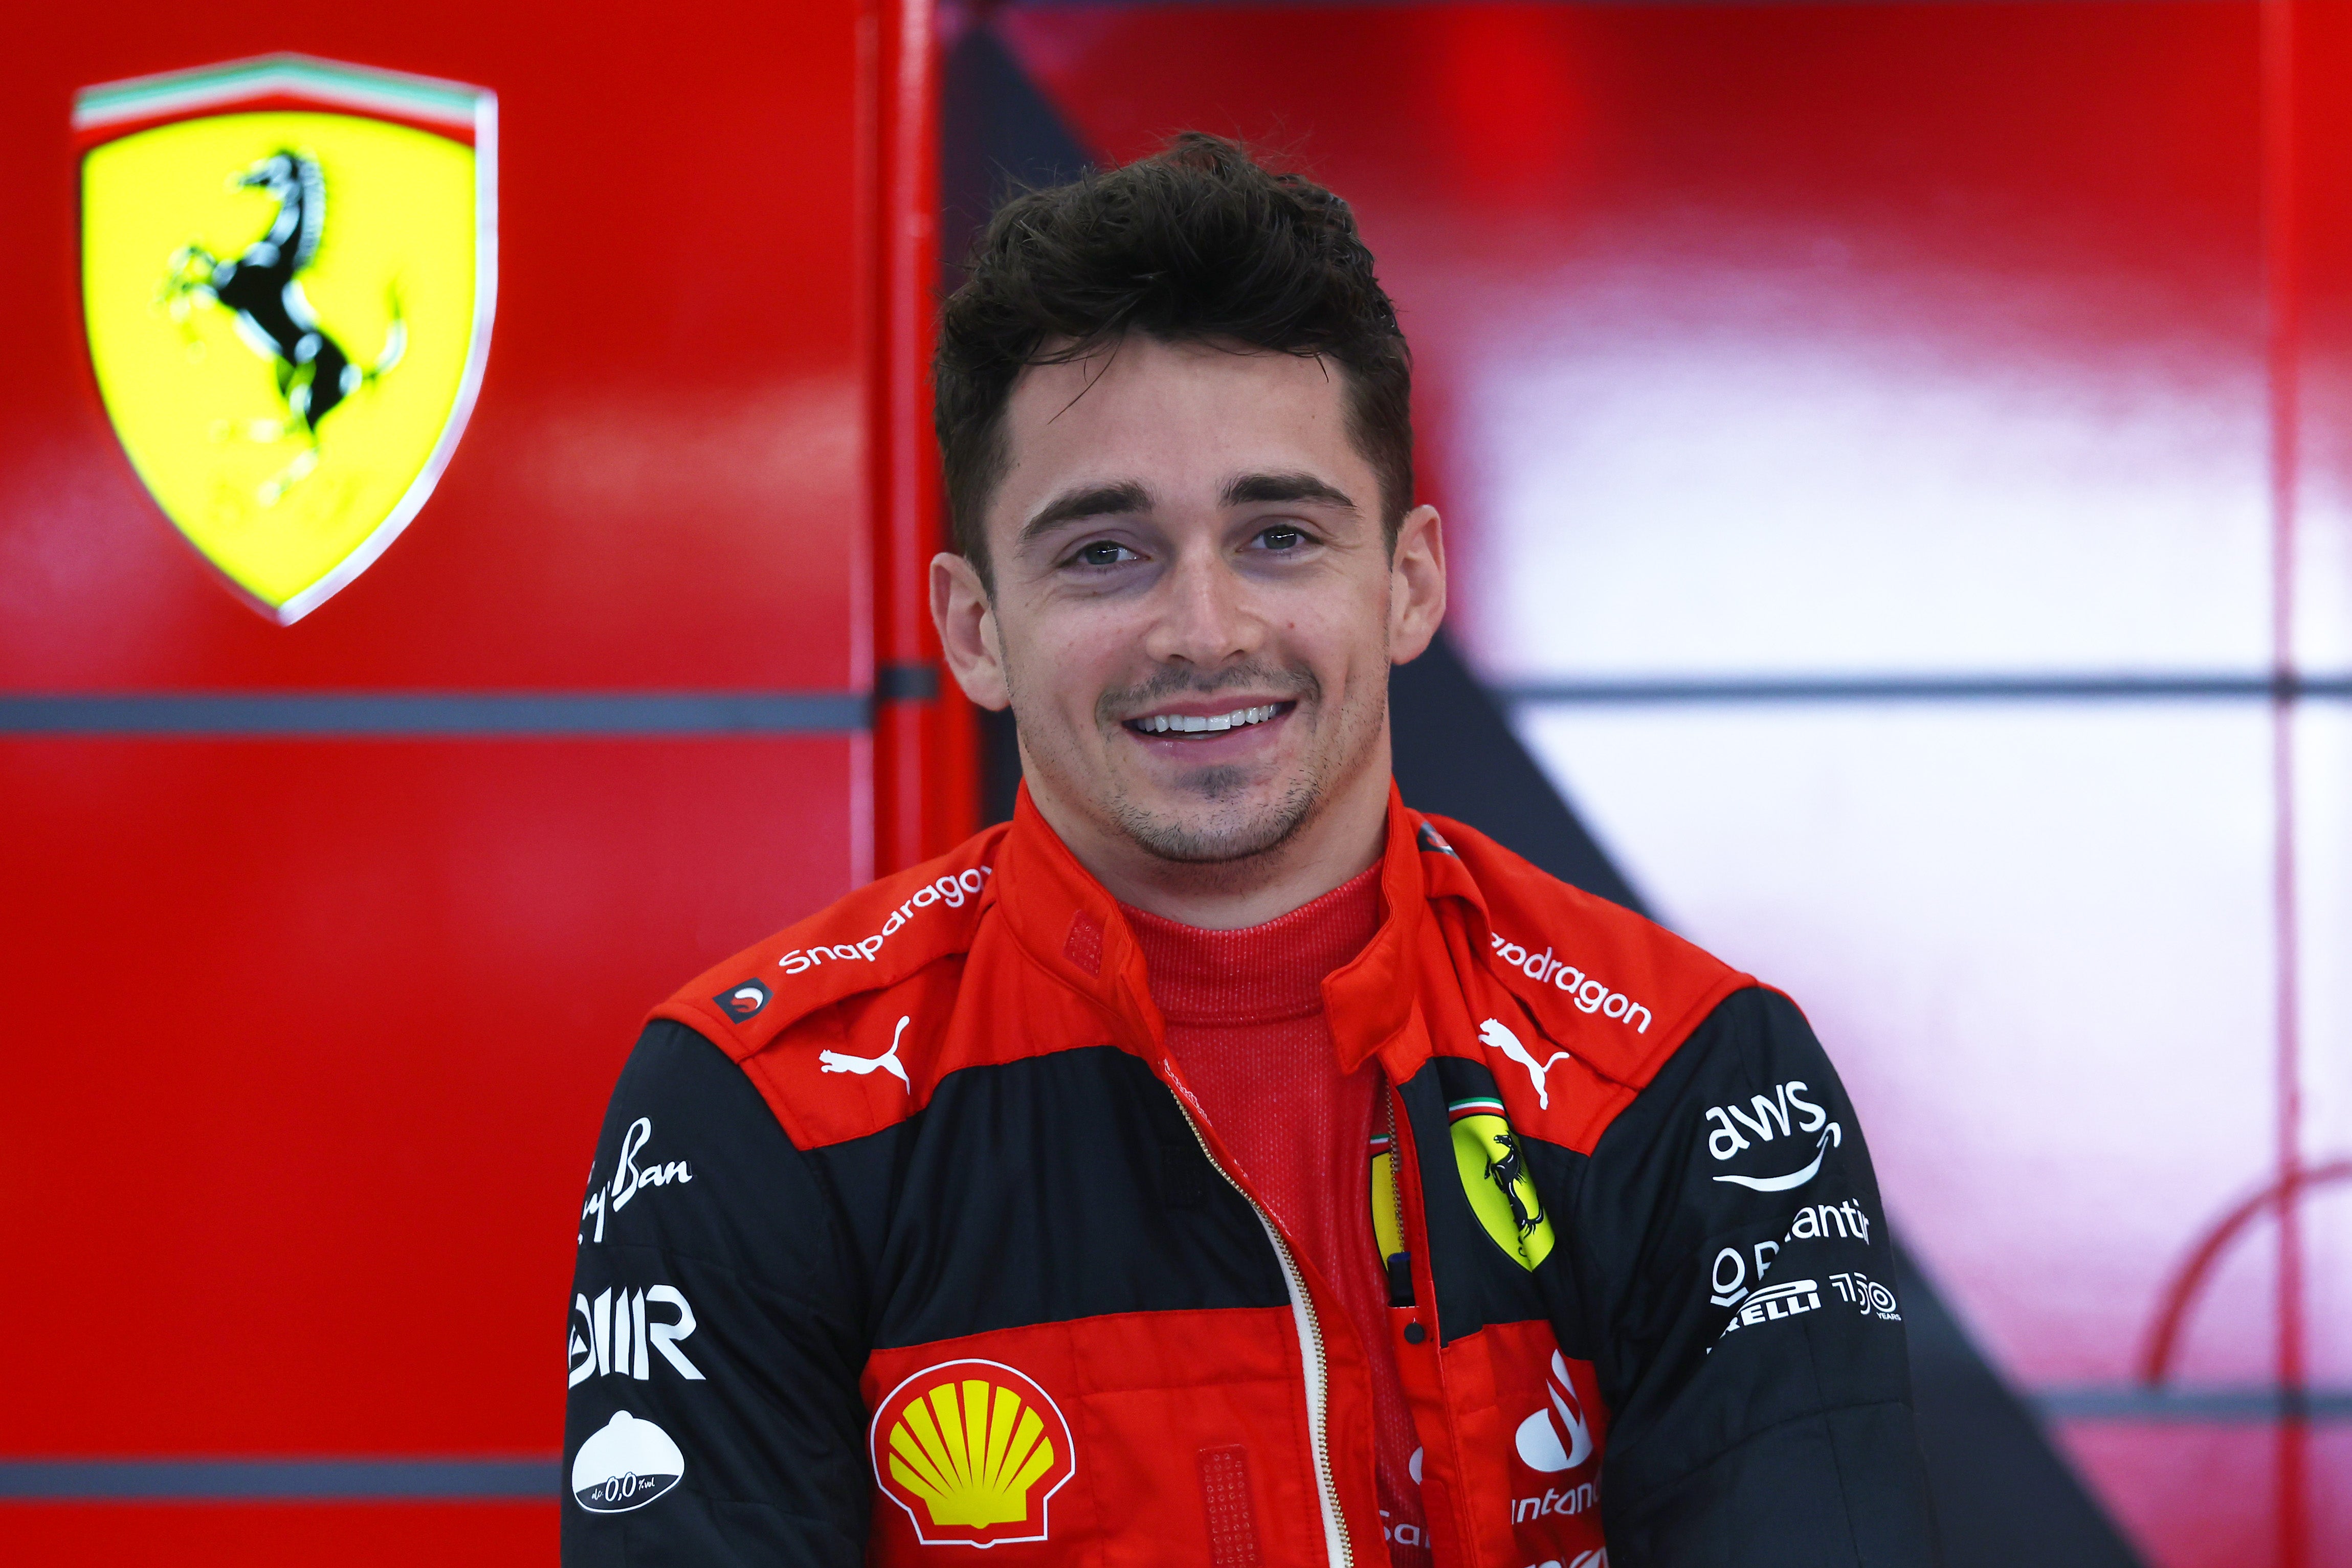 Leclerc looks set to challenge for a world title after years of disappointment for the Ferrari team